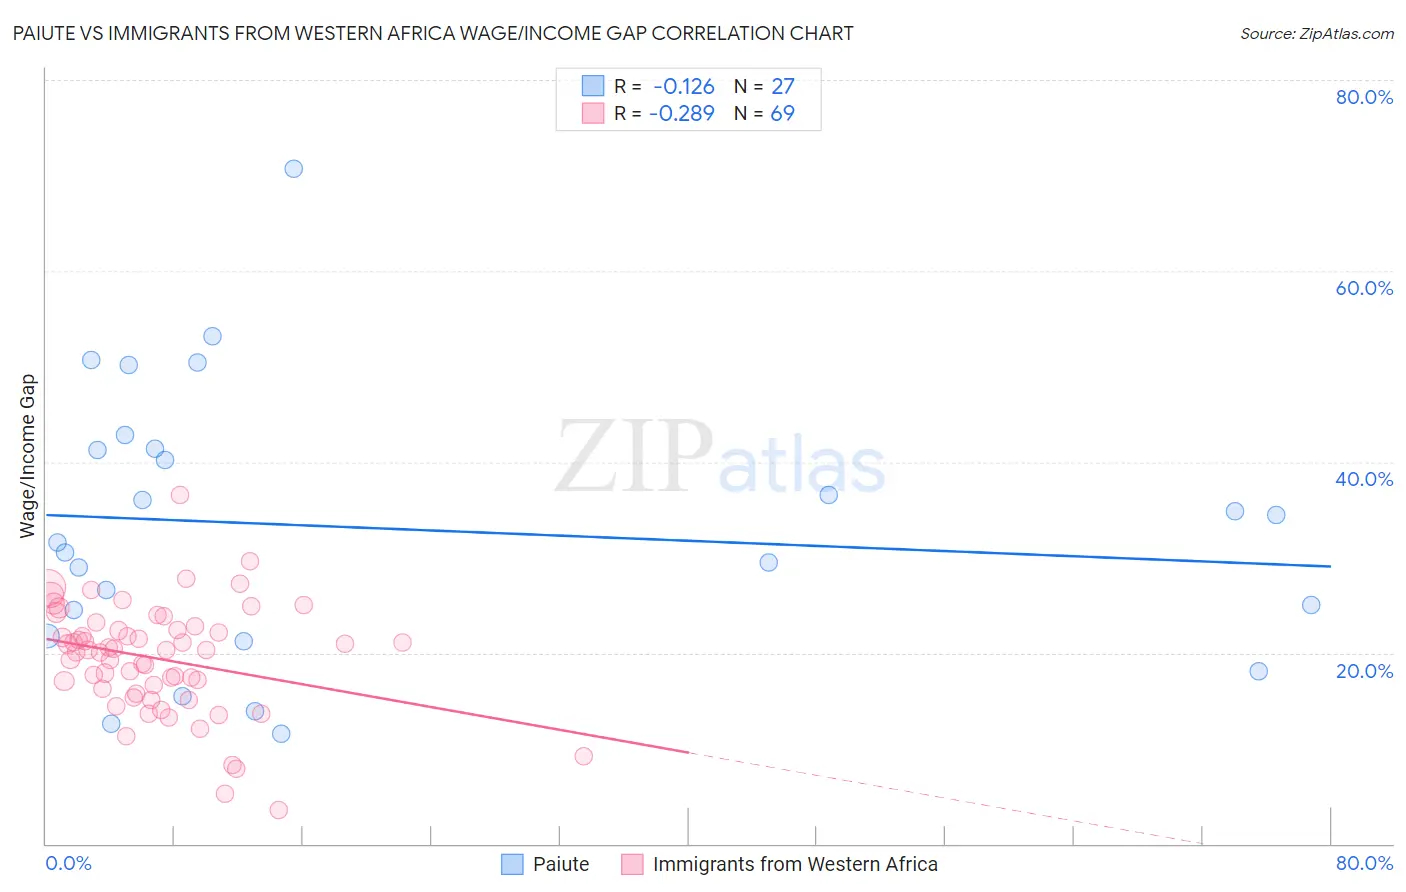 Paiute vs Immigrants from Western Africa Wage/Income Gap